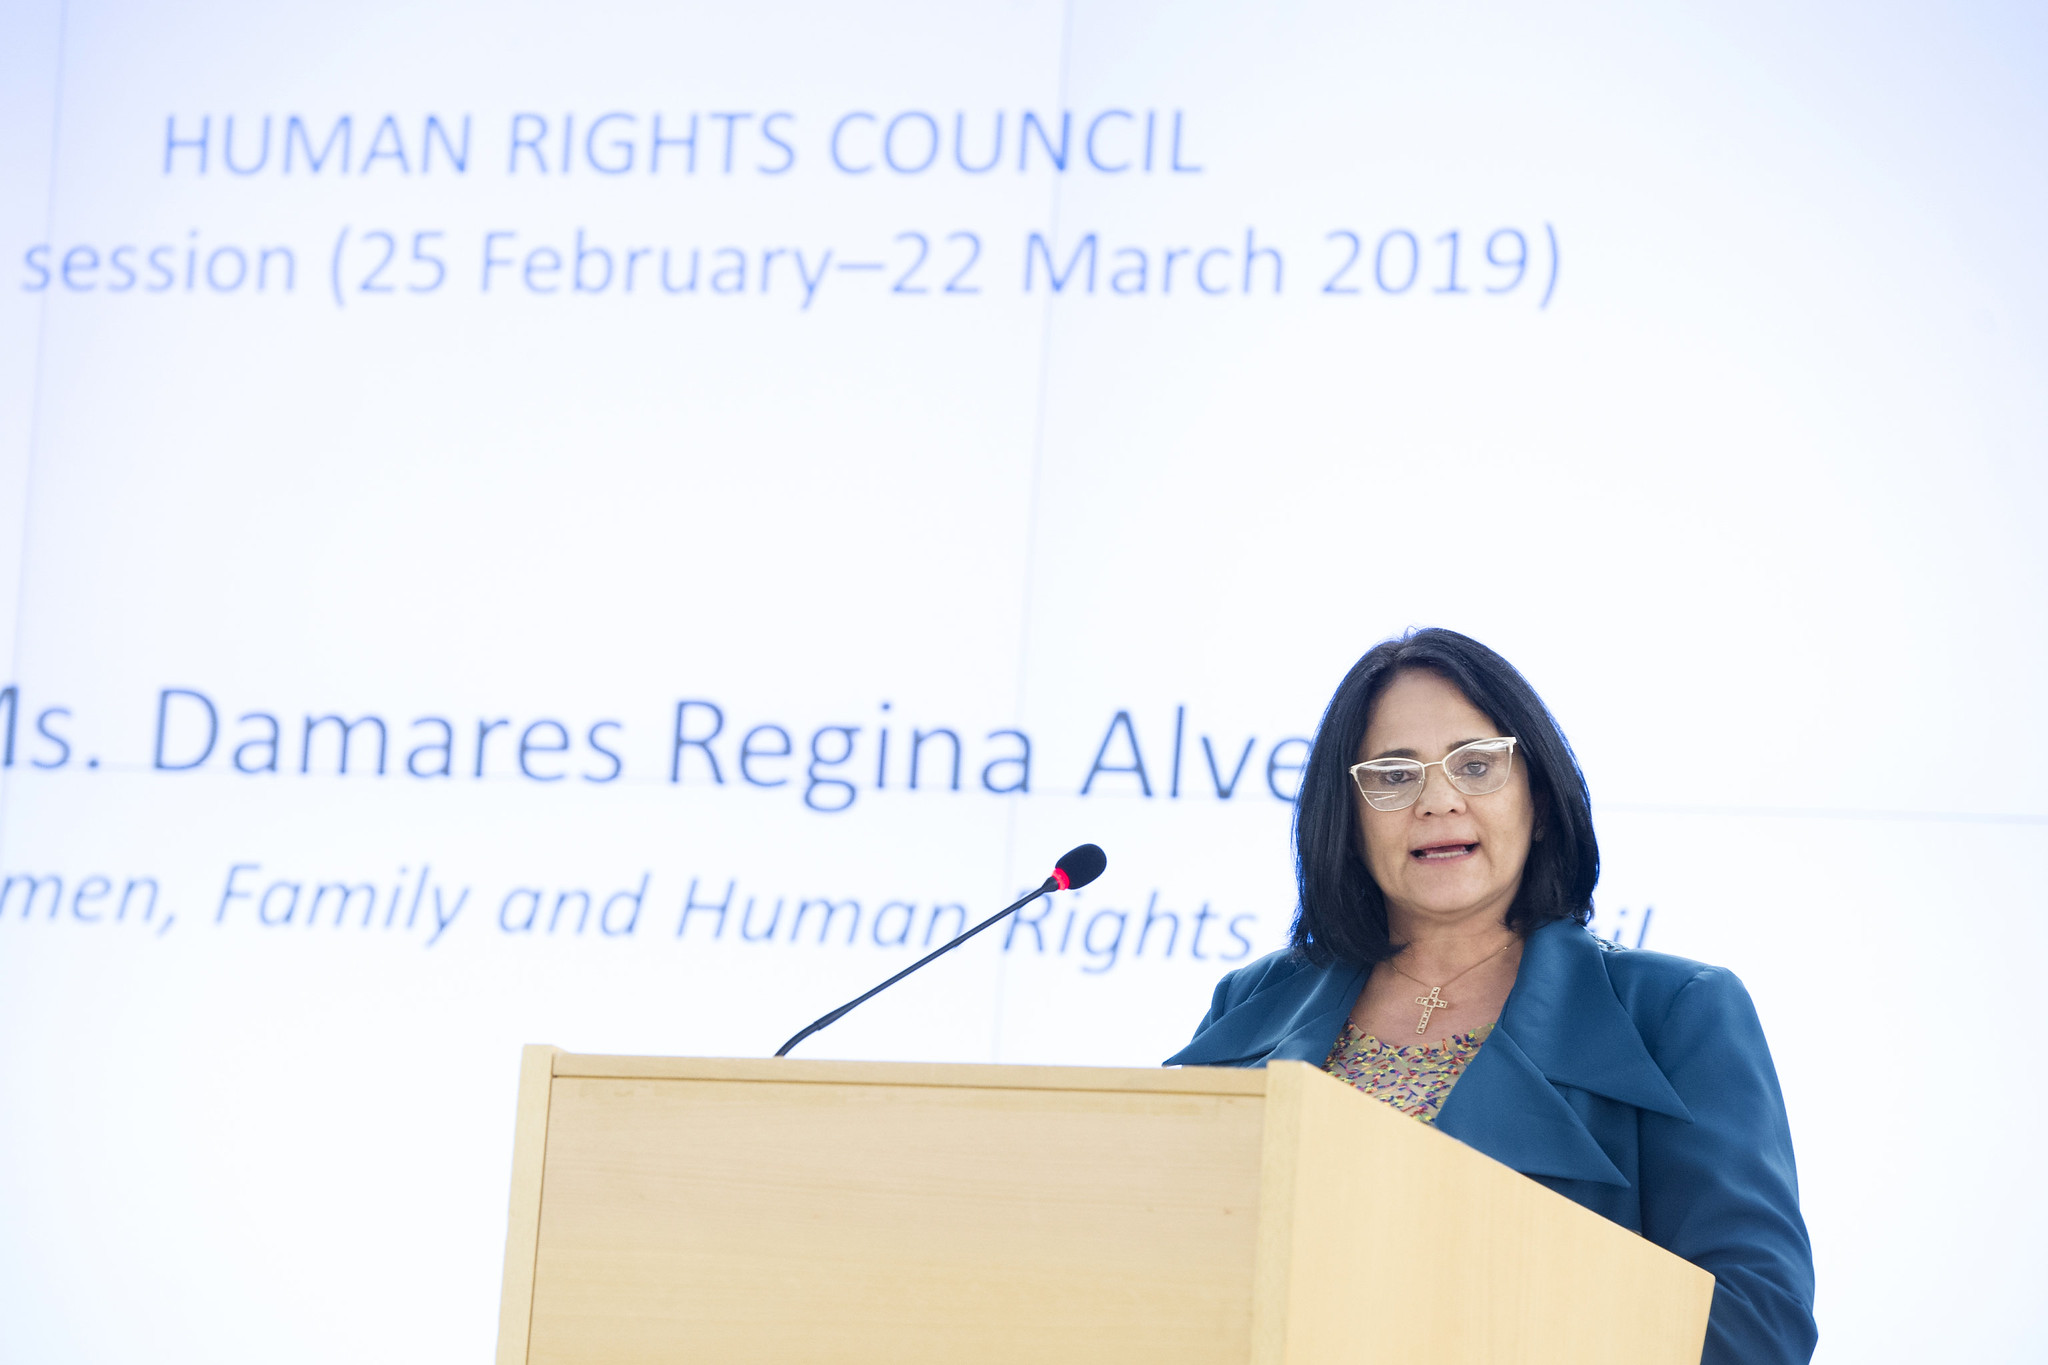 H.E. Ms. Damares Regina Alves, Minister of Women, Family and Human Rights, Brazil addresses during the Opening of the 40th session of the Human Rights Council, Palais des Nations. 25 February 2019. UN Photo by Violaine Martin